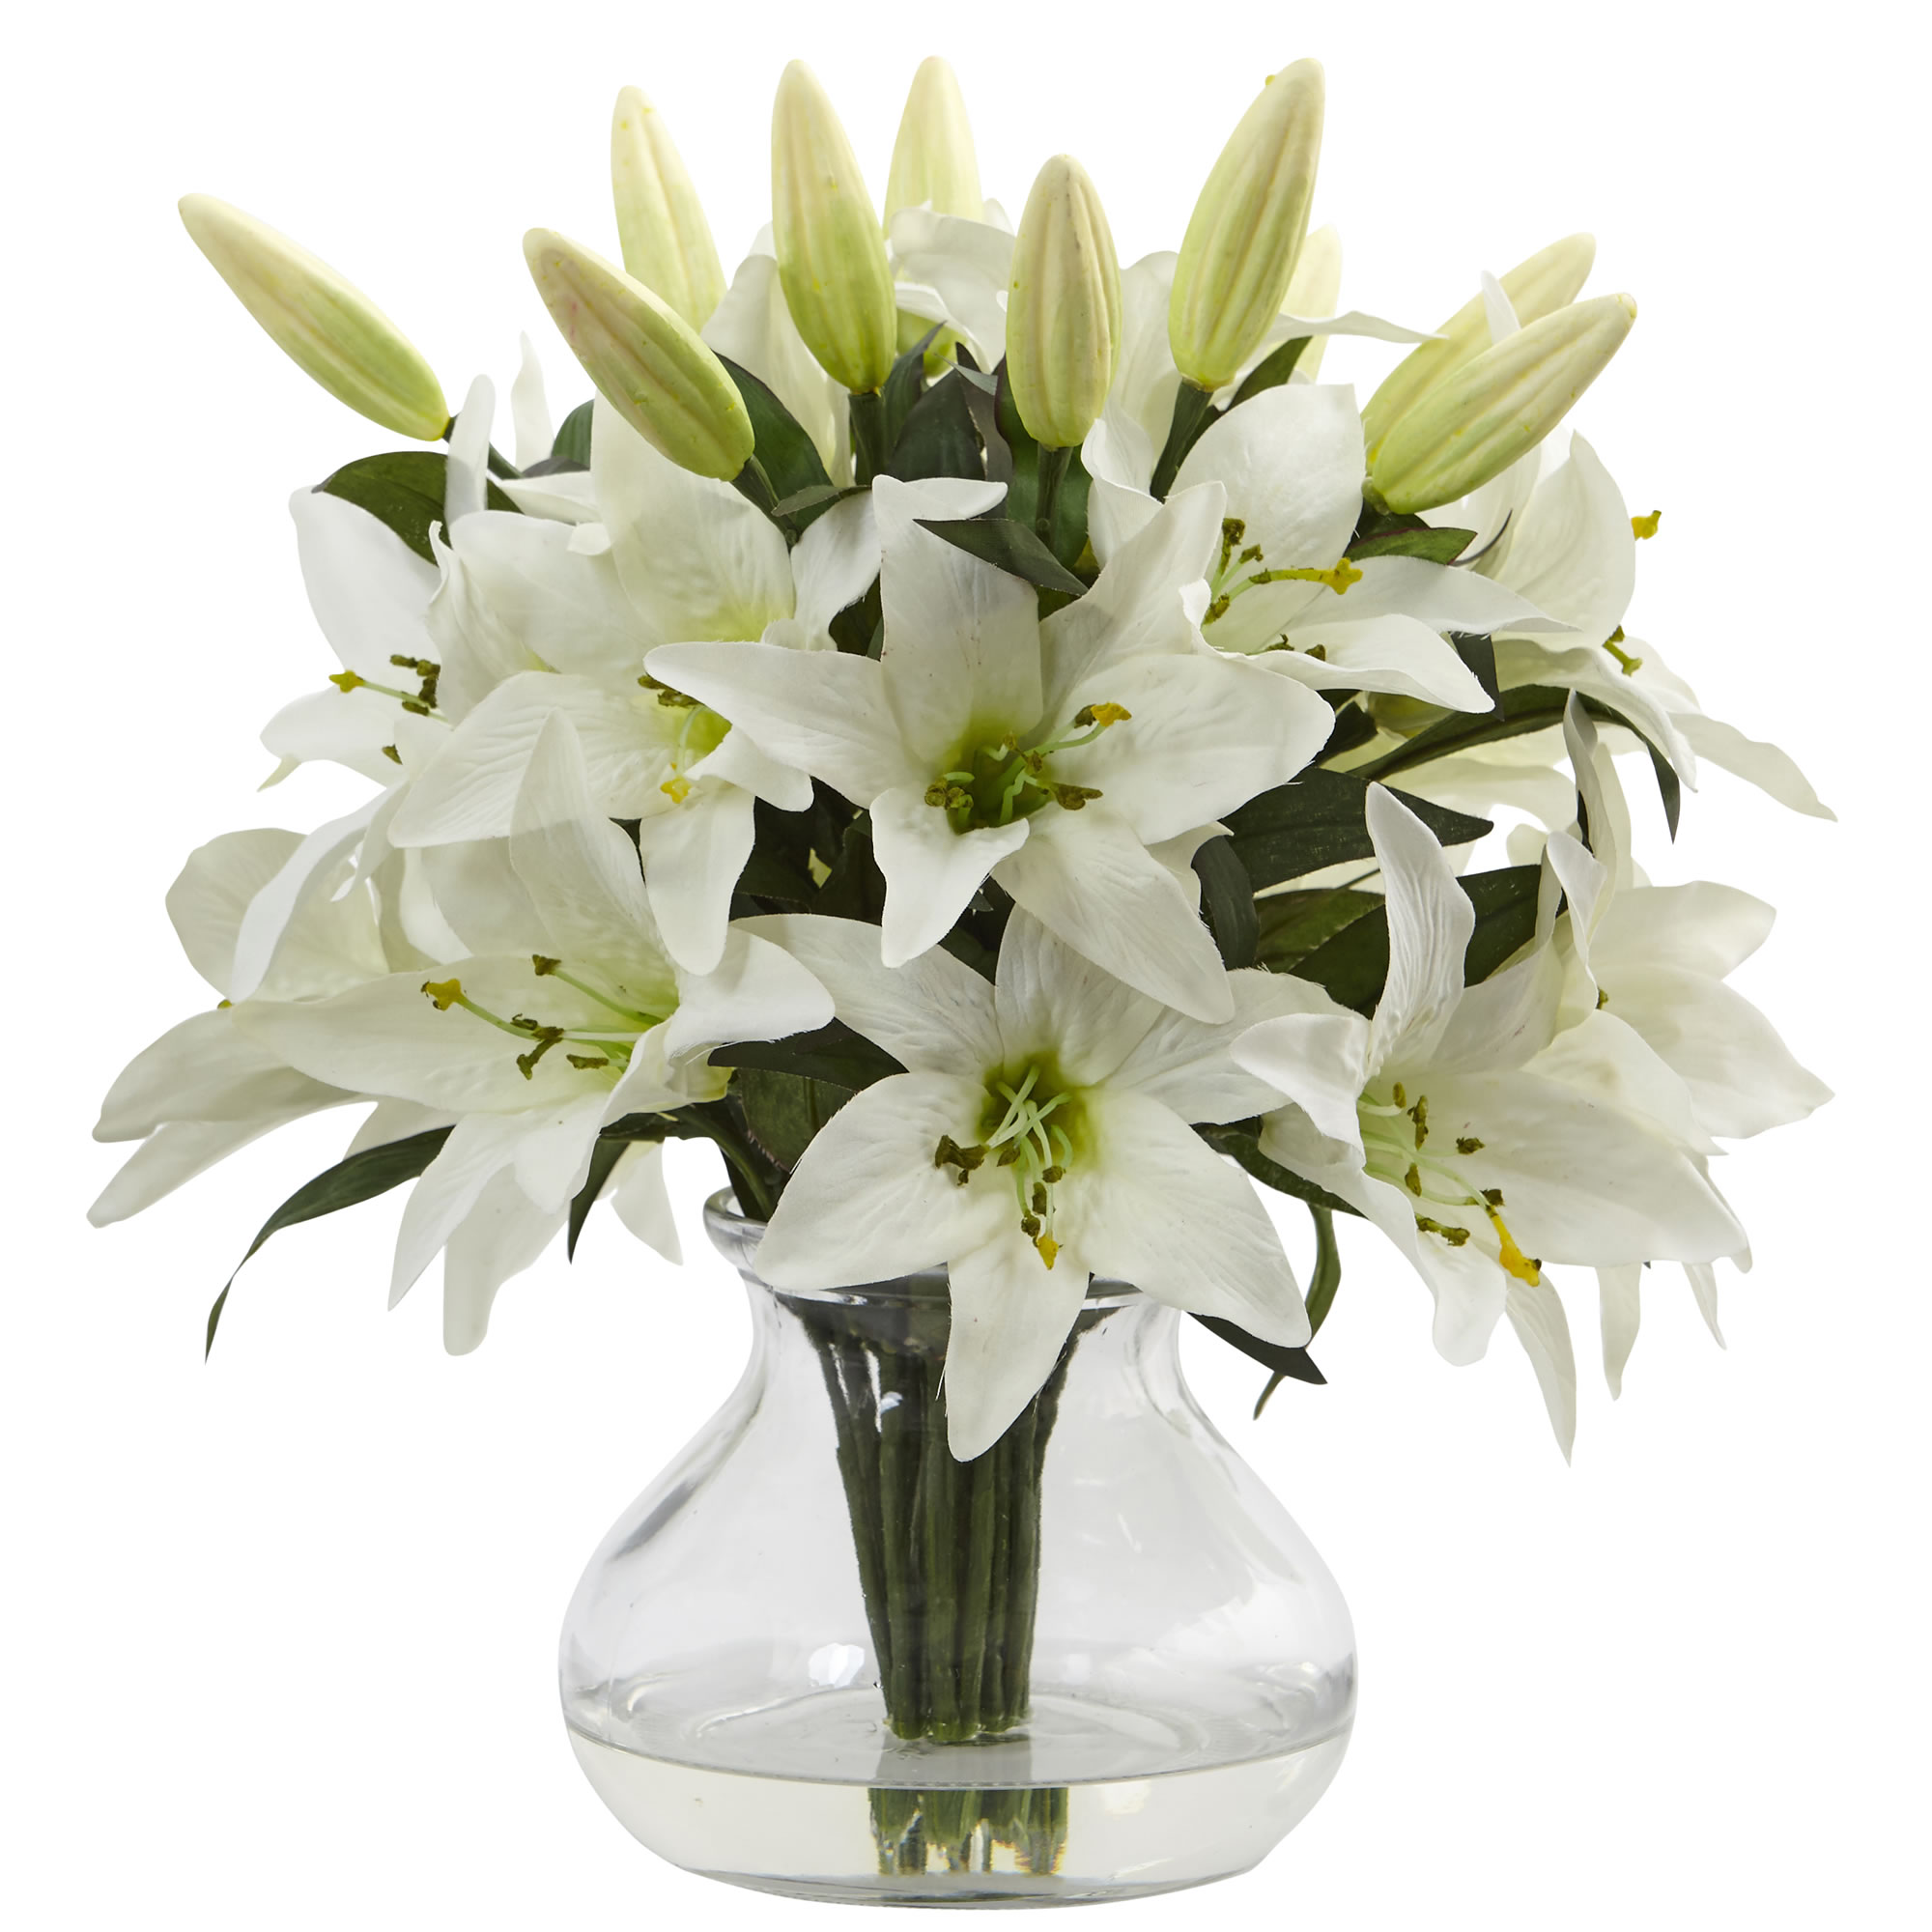 13.5 inch White Lily Arrangement with Vase